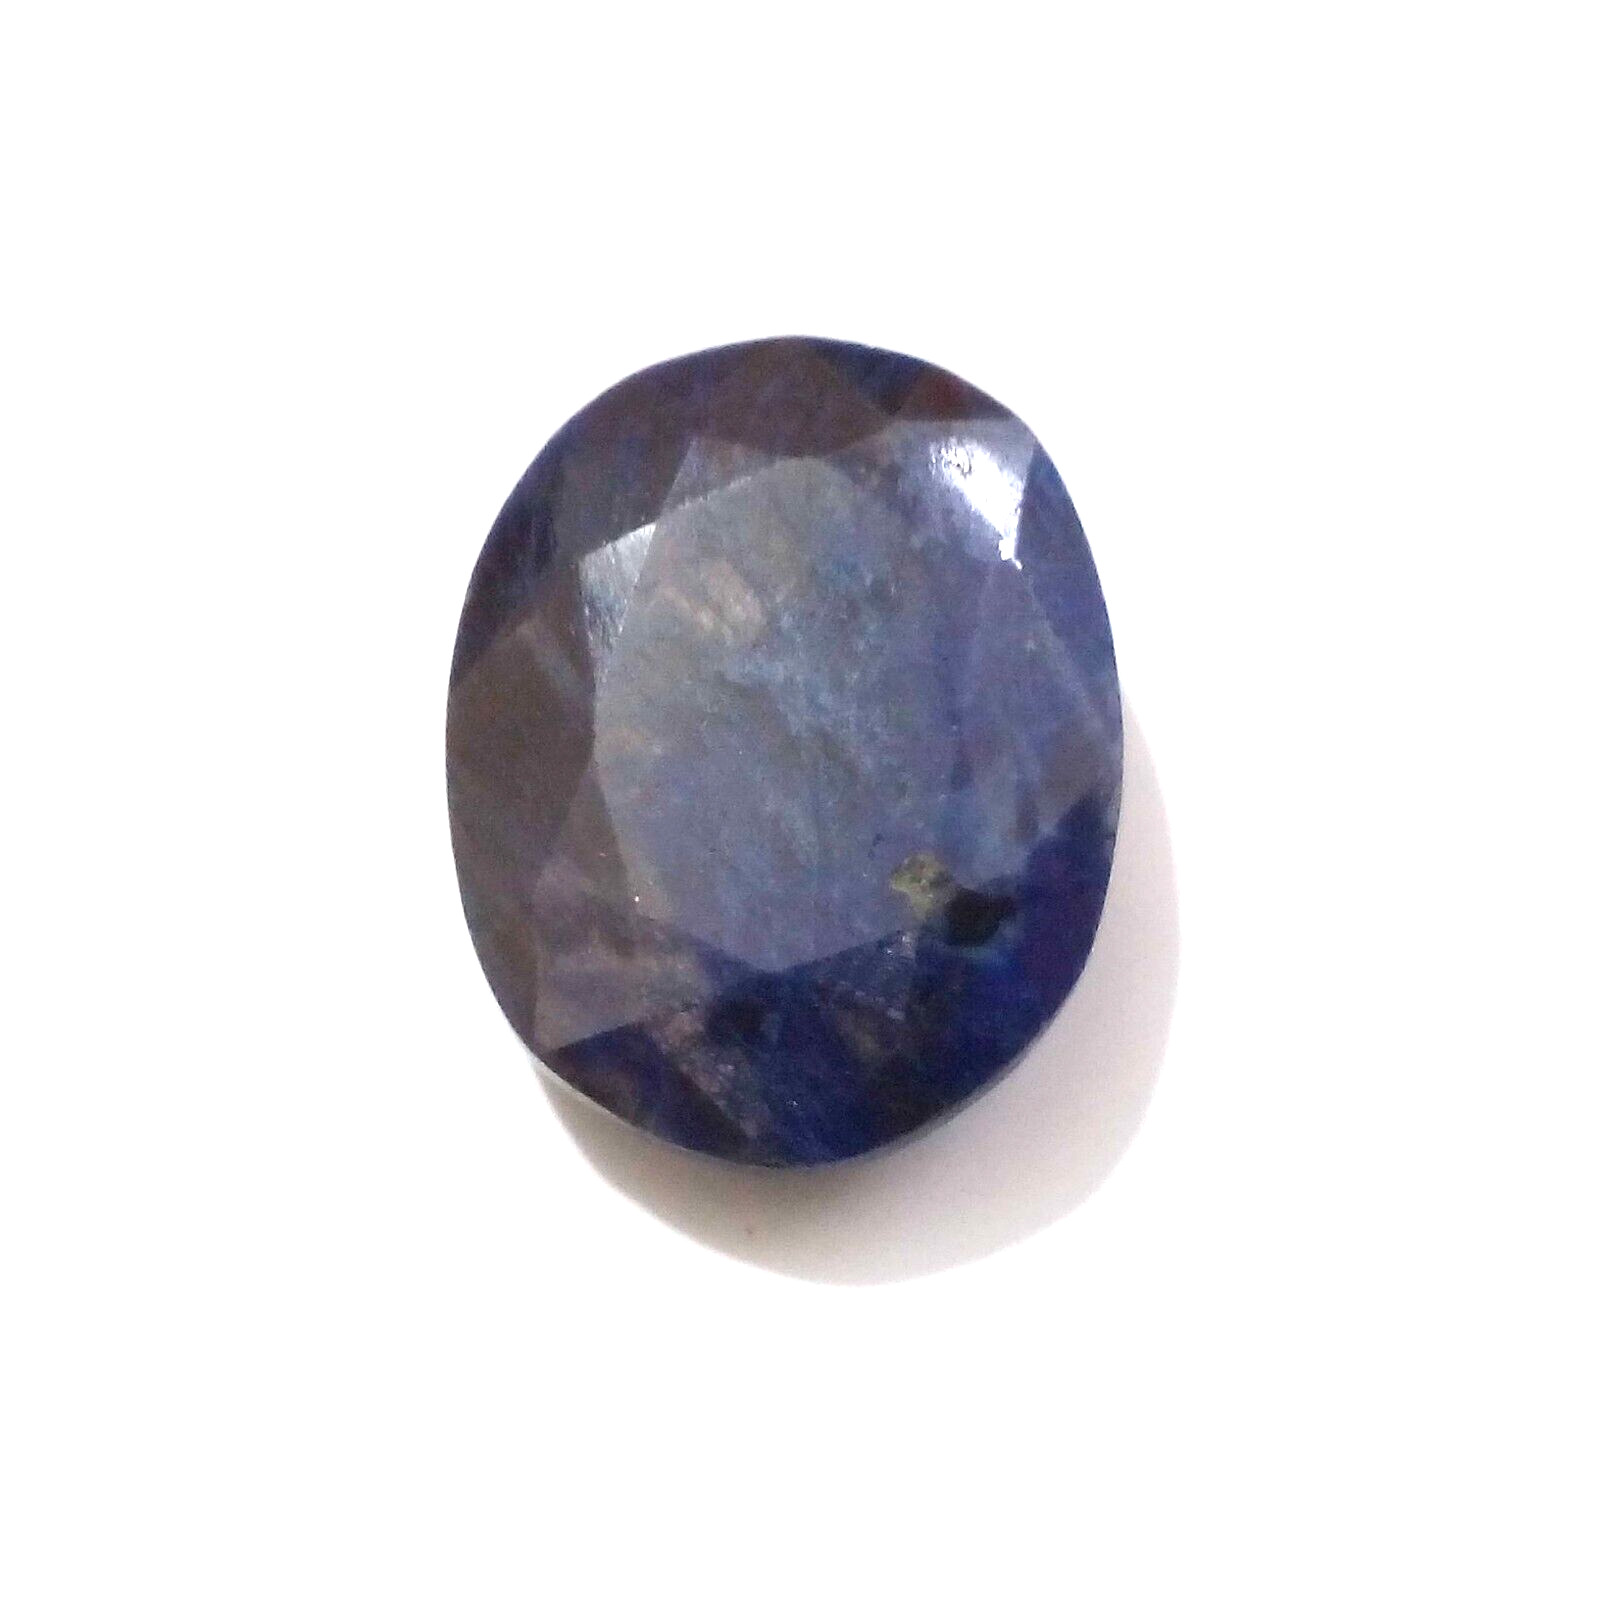 Attractive Madagascar Blue Sapphire Faceted Oval Shape 13.42 Crt Loose Gemstone